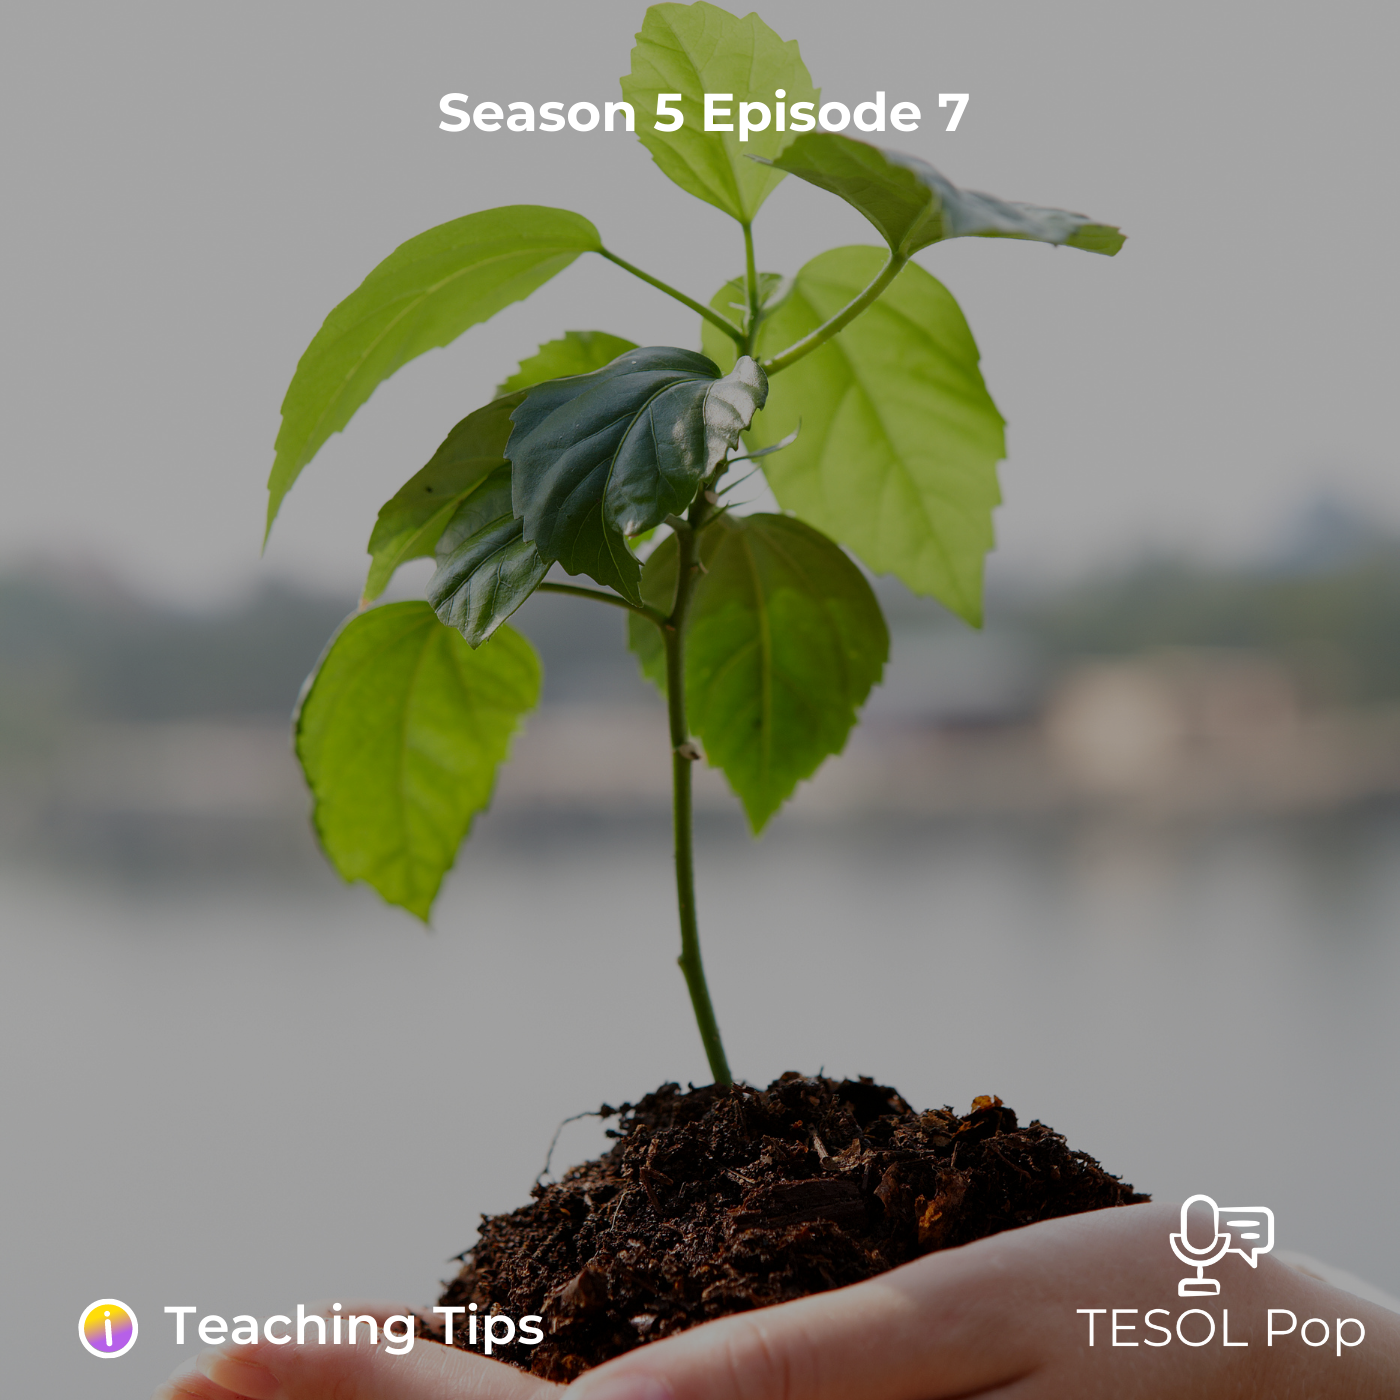 S5E7: The Know, Show, and Grow Stages of Teaching and Learning